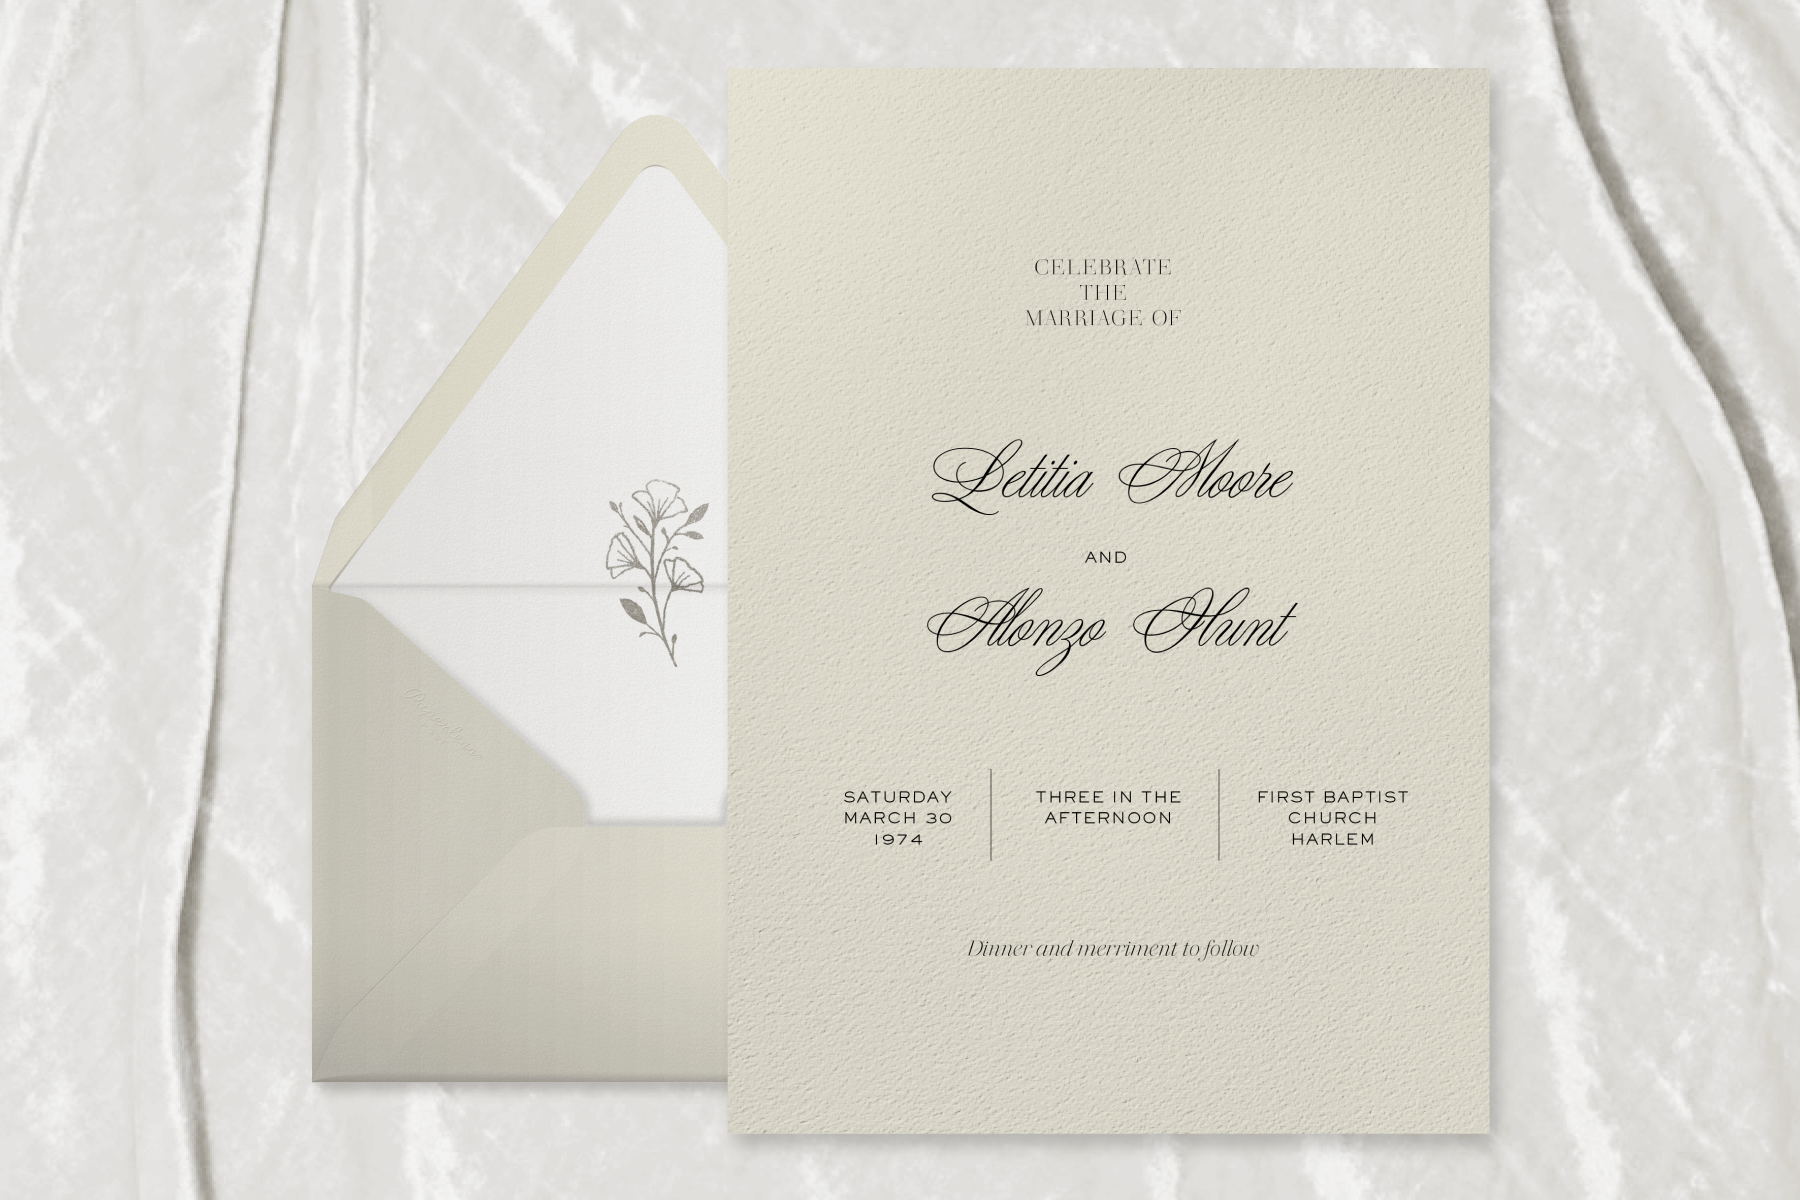 A light sage green wedding invitation on a white velvet backdrop shows the couple’s names in delicate script in the center, beside a matching envelope with a small flower bud illustration on the liner.